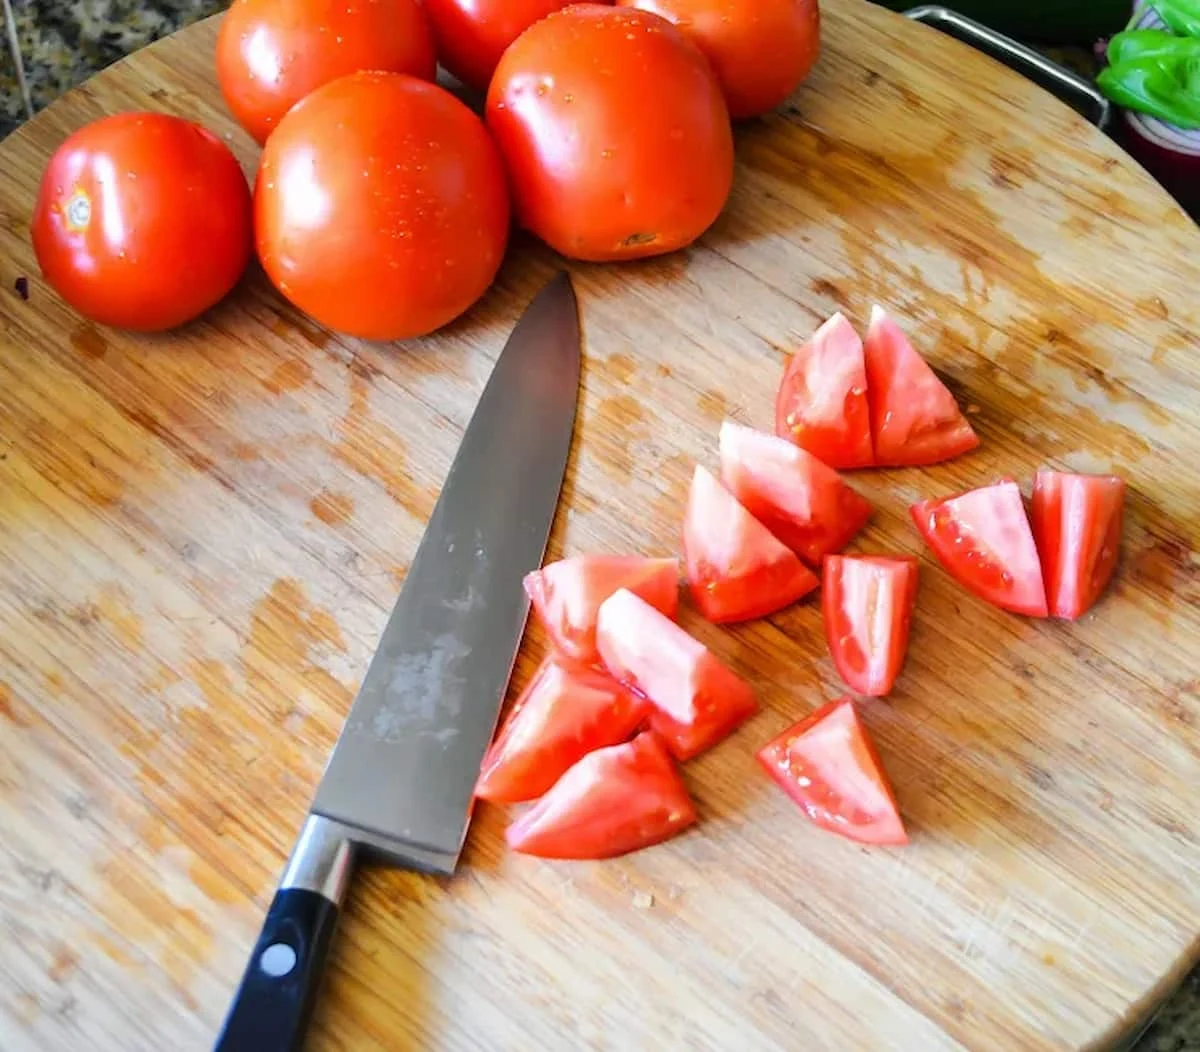 Tomatoes sliced into cubes on a wooden cutting board with a knife resting on board.